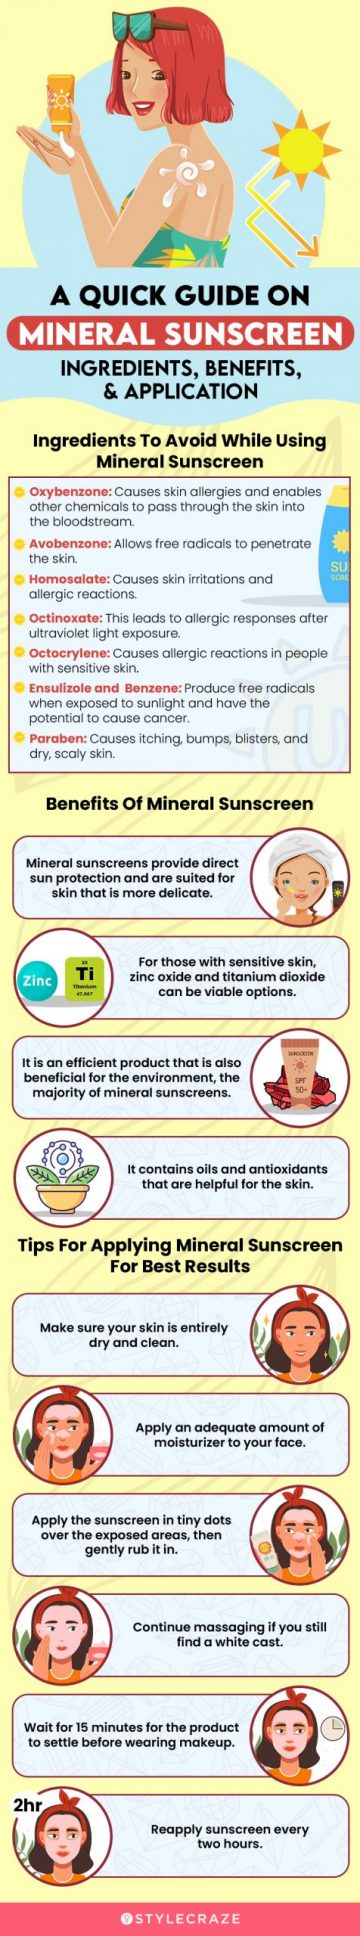 A Quick Guide On Mineral Sunscreen: Ingredients, Benefits, & Application (infographic)